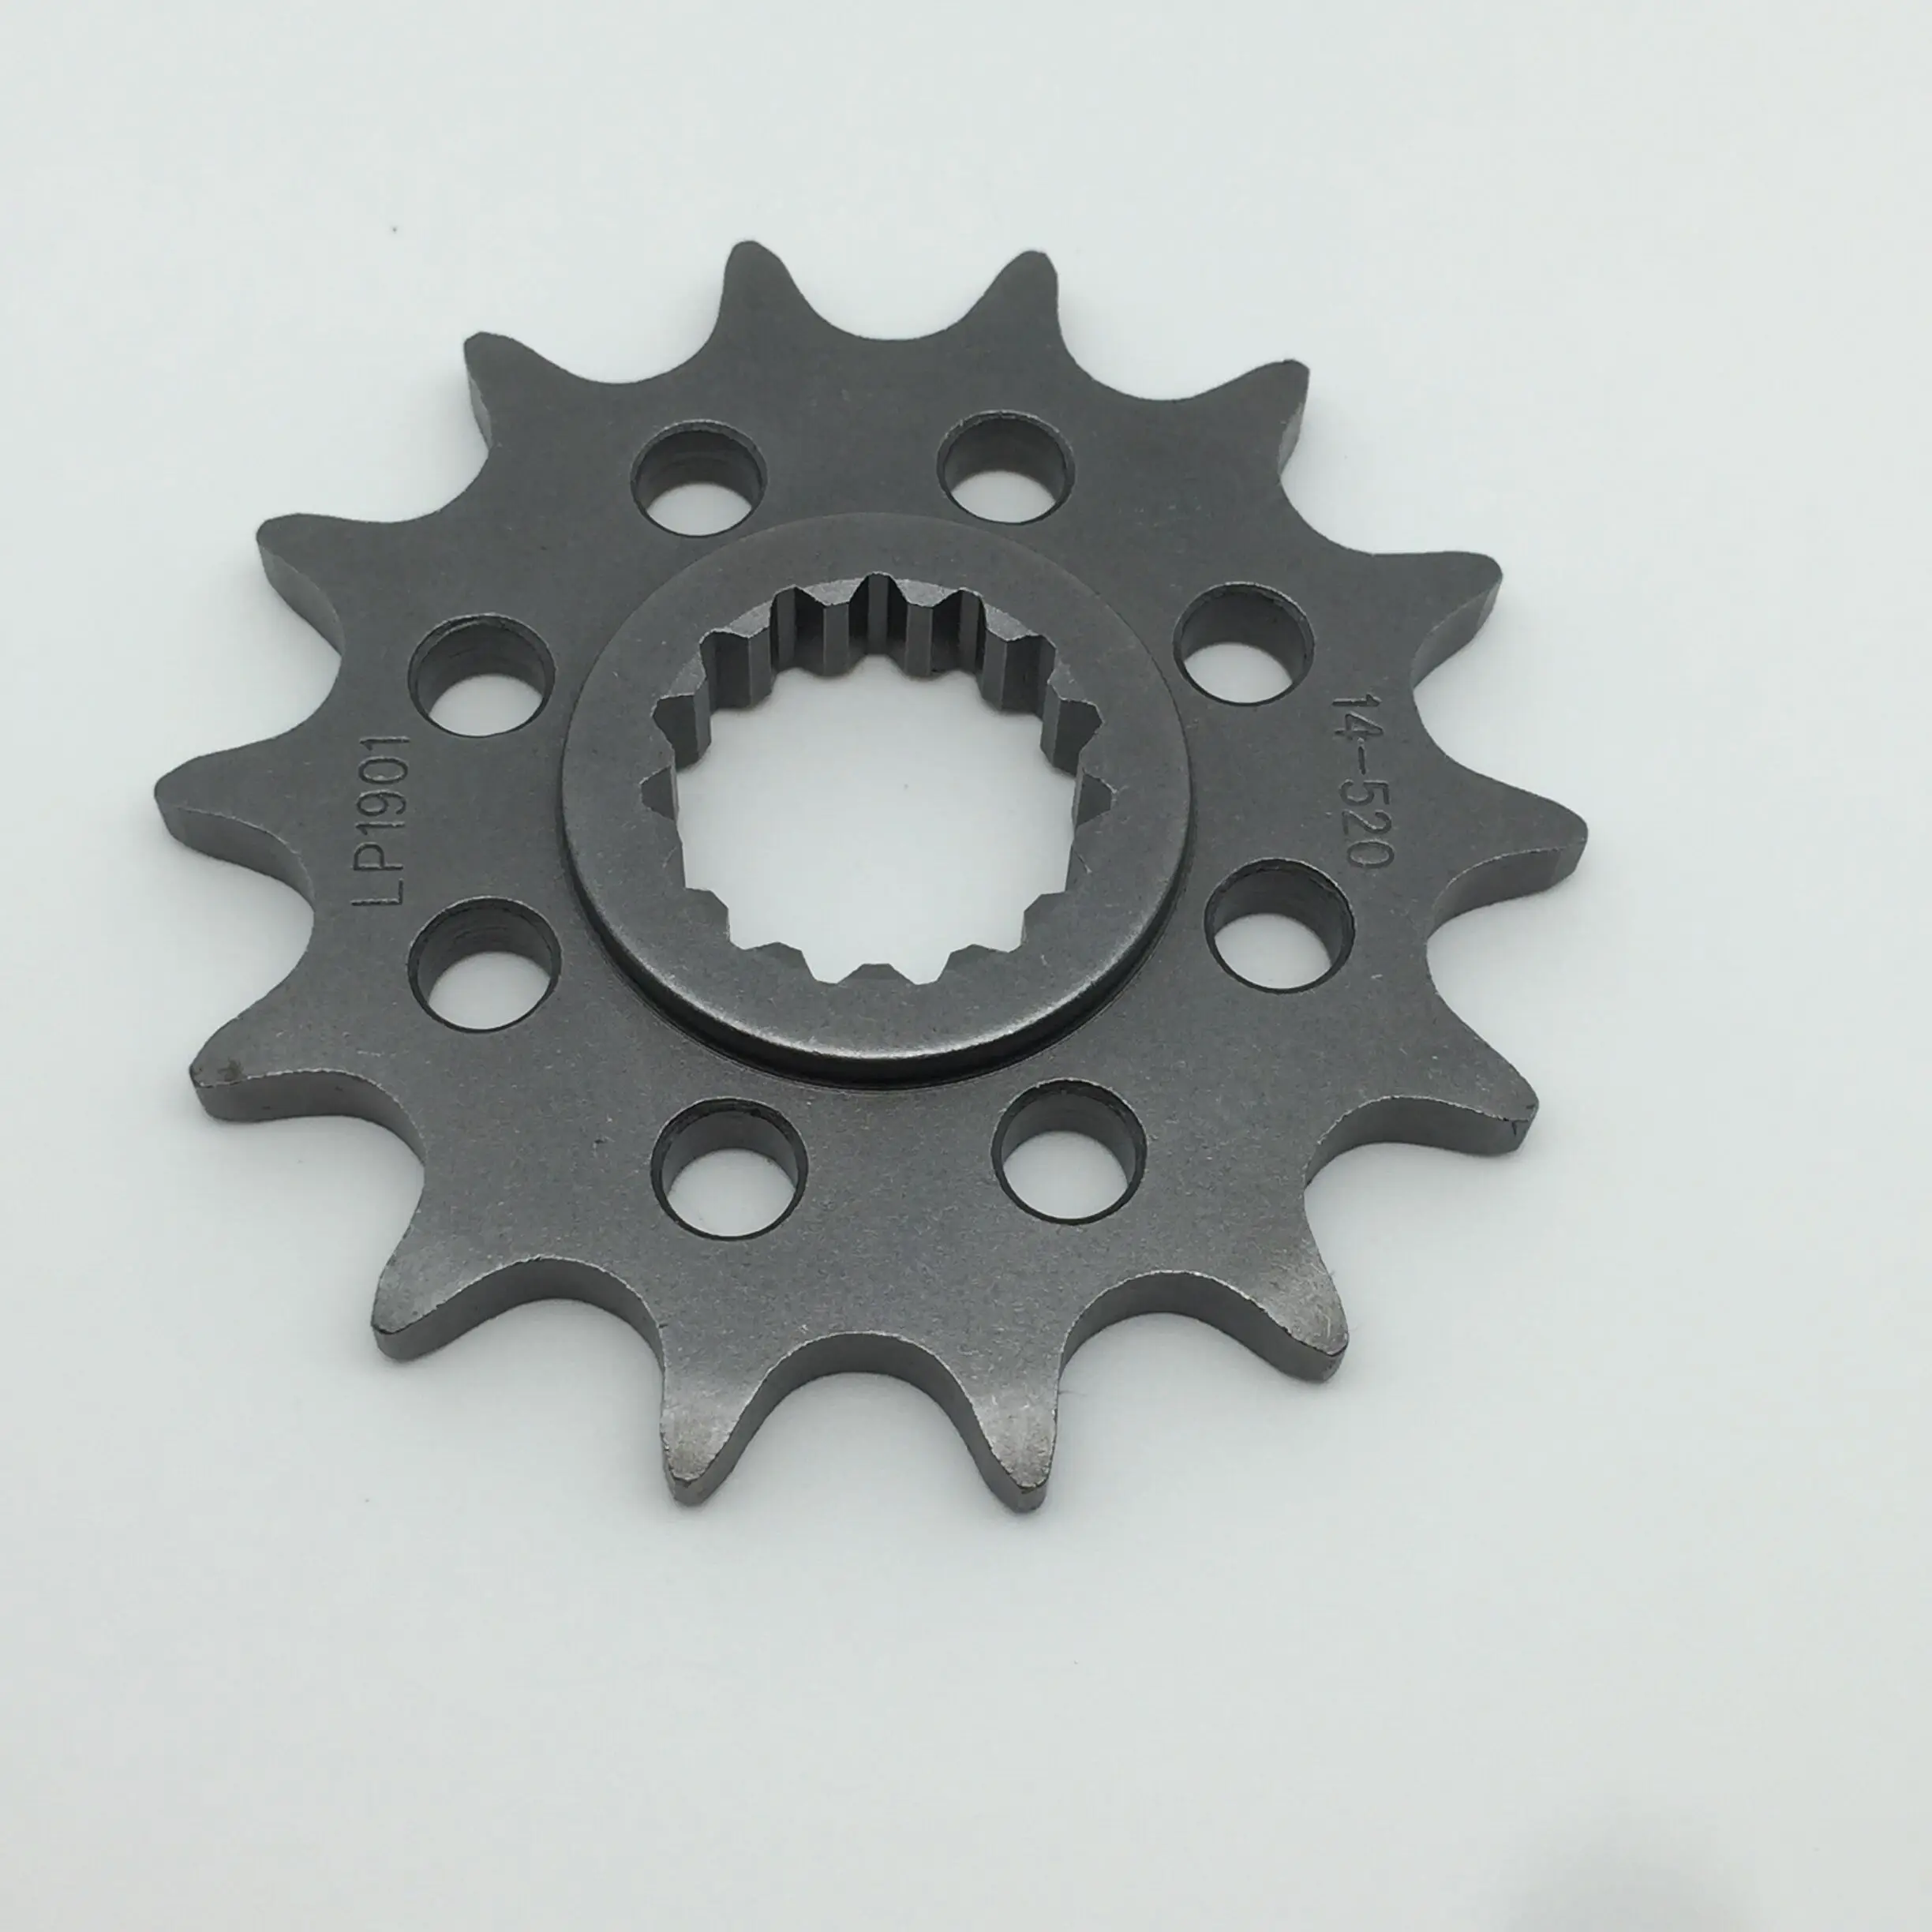 

520 Chain 13T 14T 15T Motorcycle Front Sprocket For Husqvarna 125 150 250 251 300 350 450 501 TC TE TX FC FE FX FR FS Rally